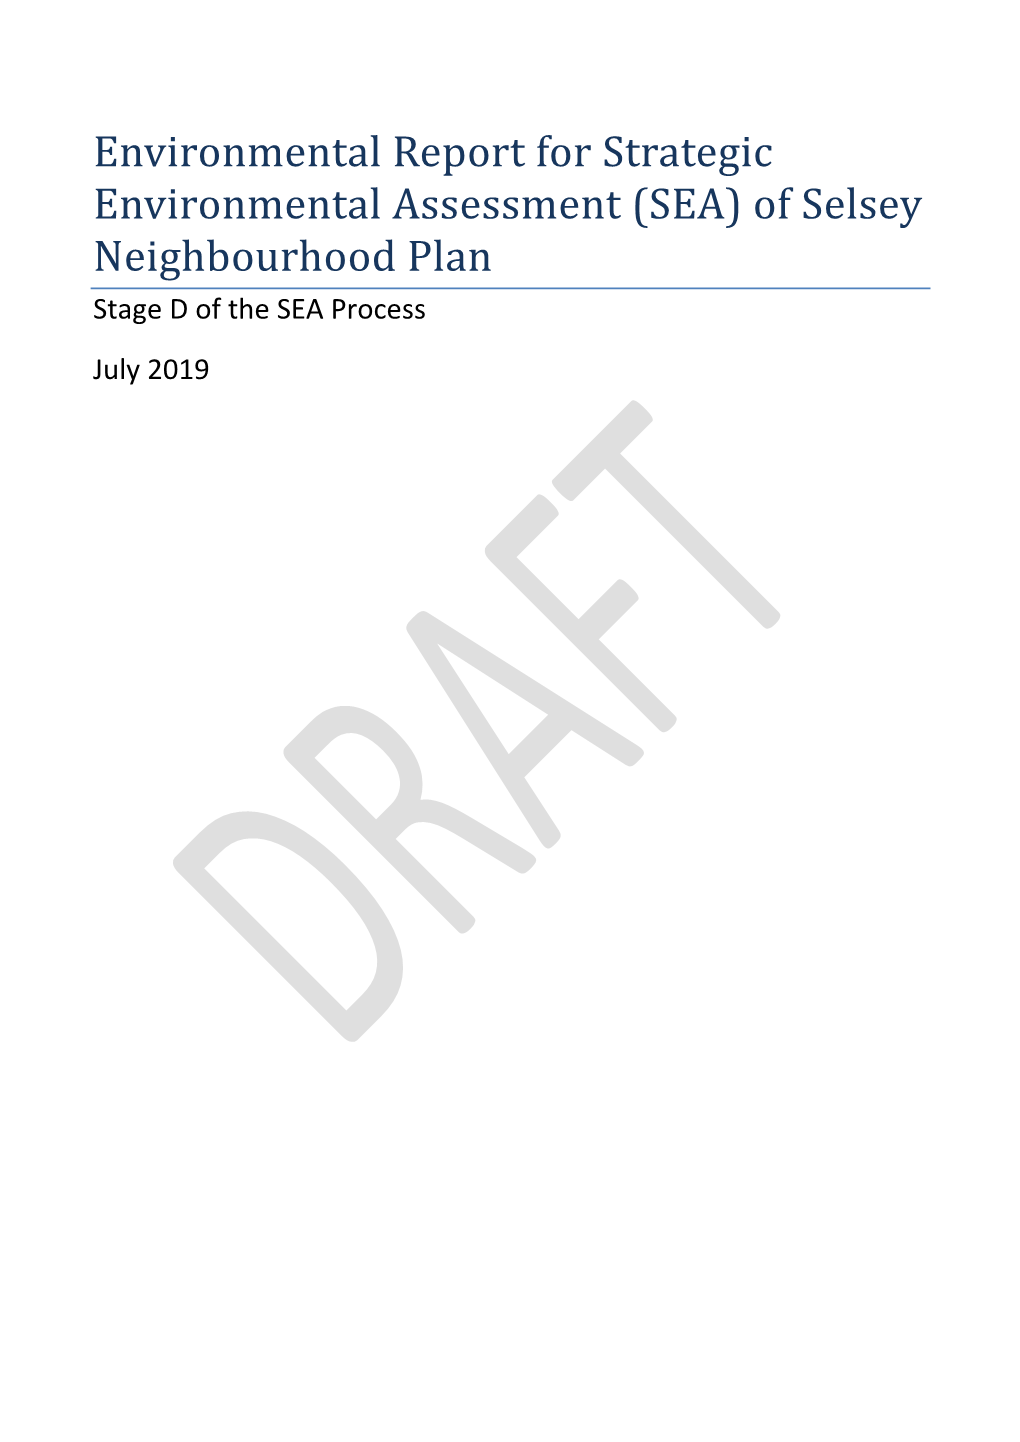 Environmental Report for Strategic Environmental Assessment (SEA) of Selsey Neighbourhood Plan Stage D of the SEA Process July 2019